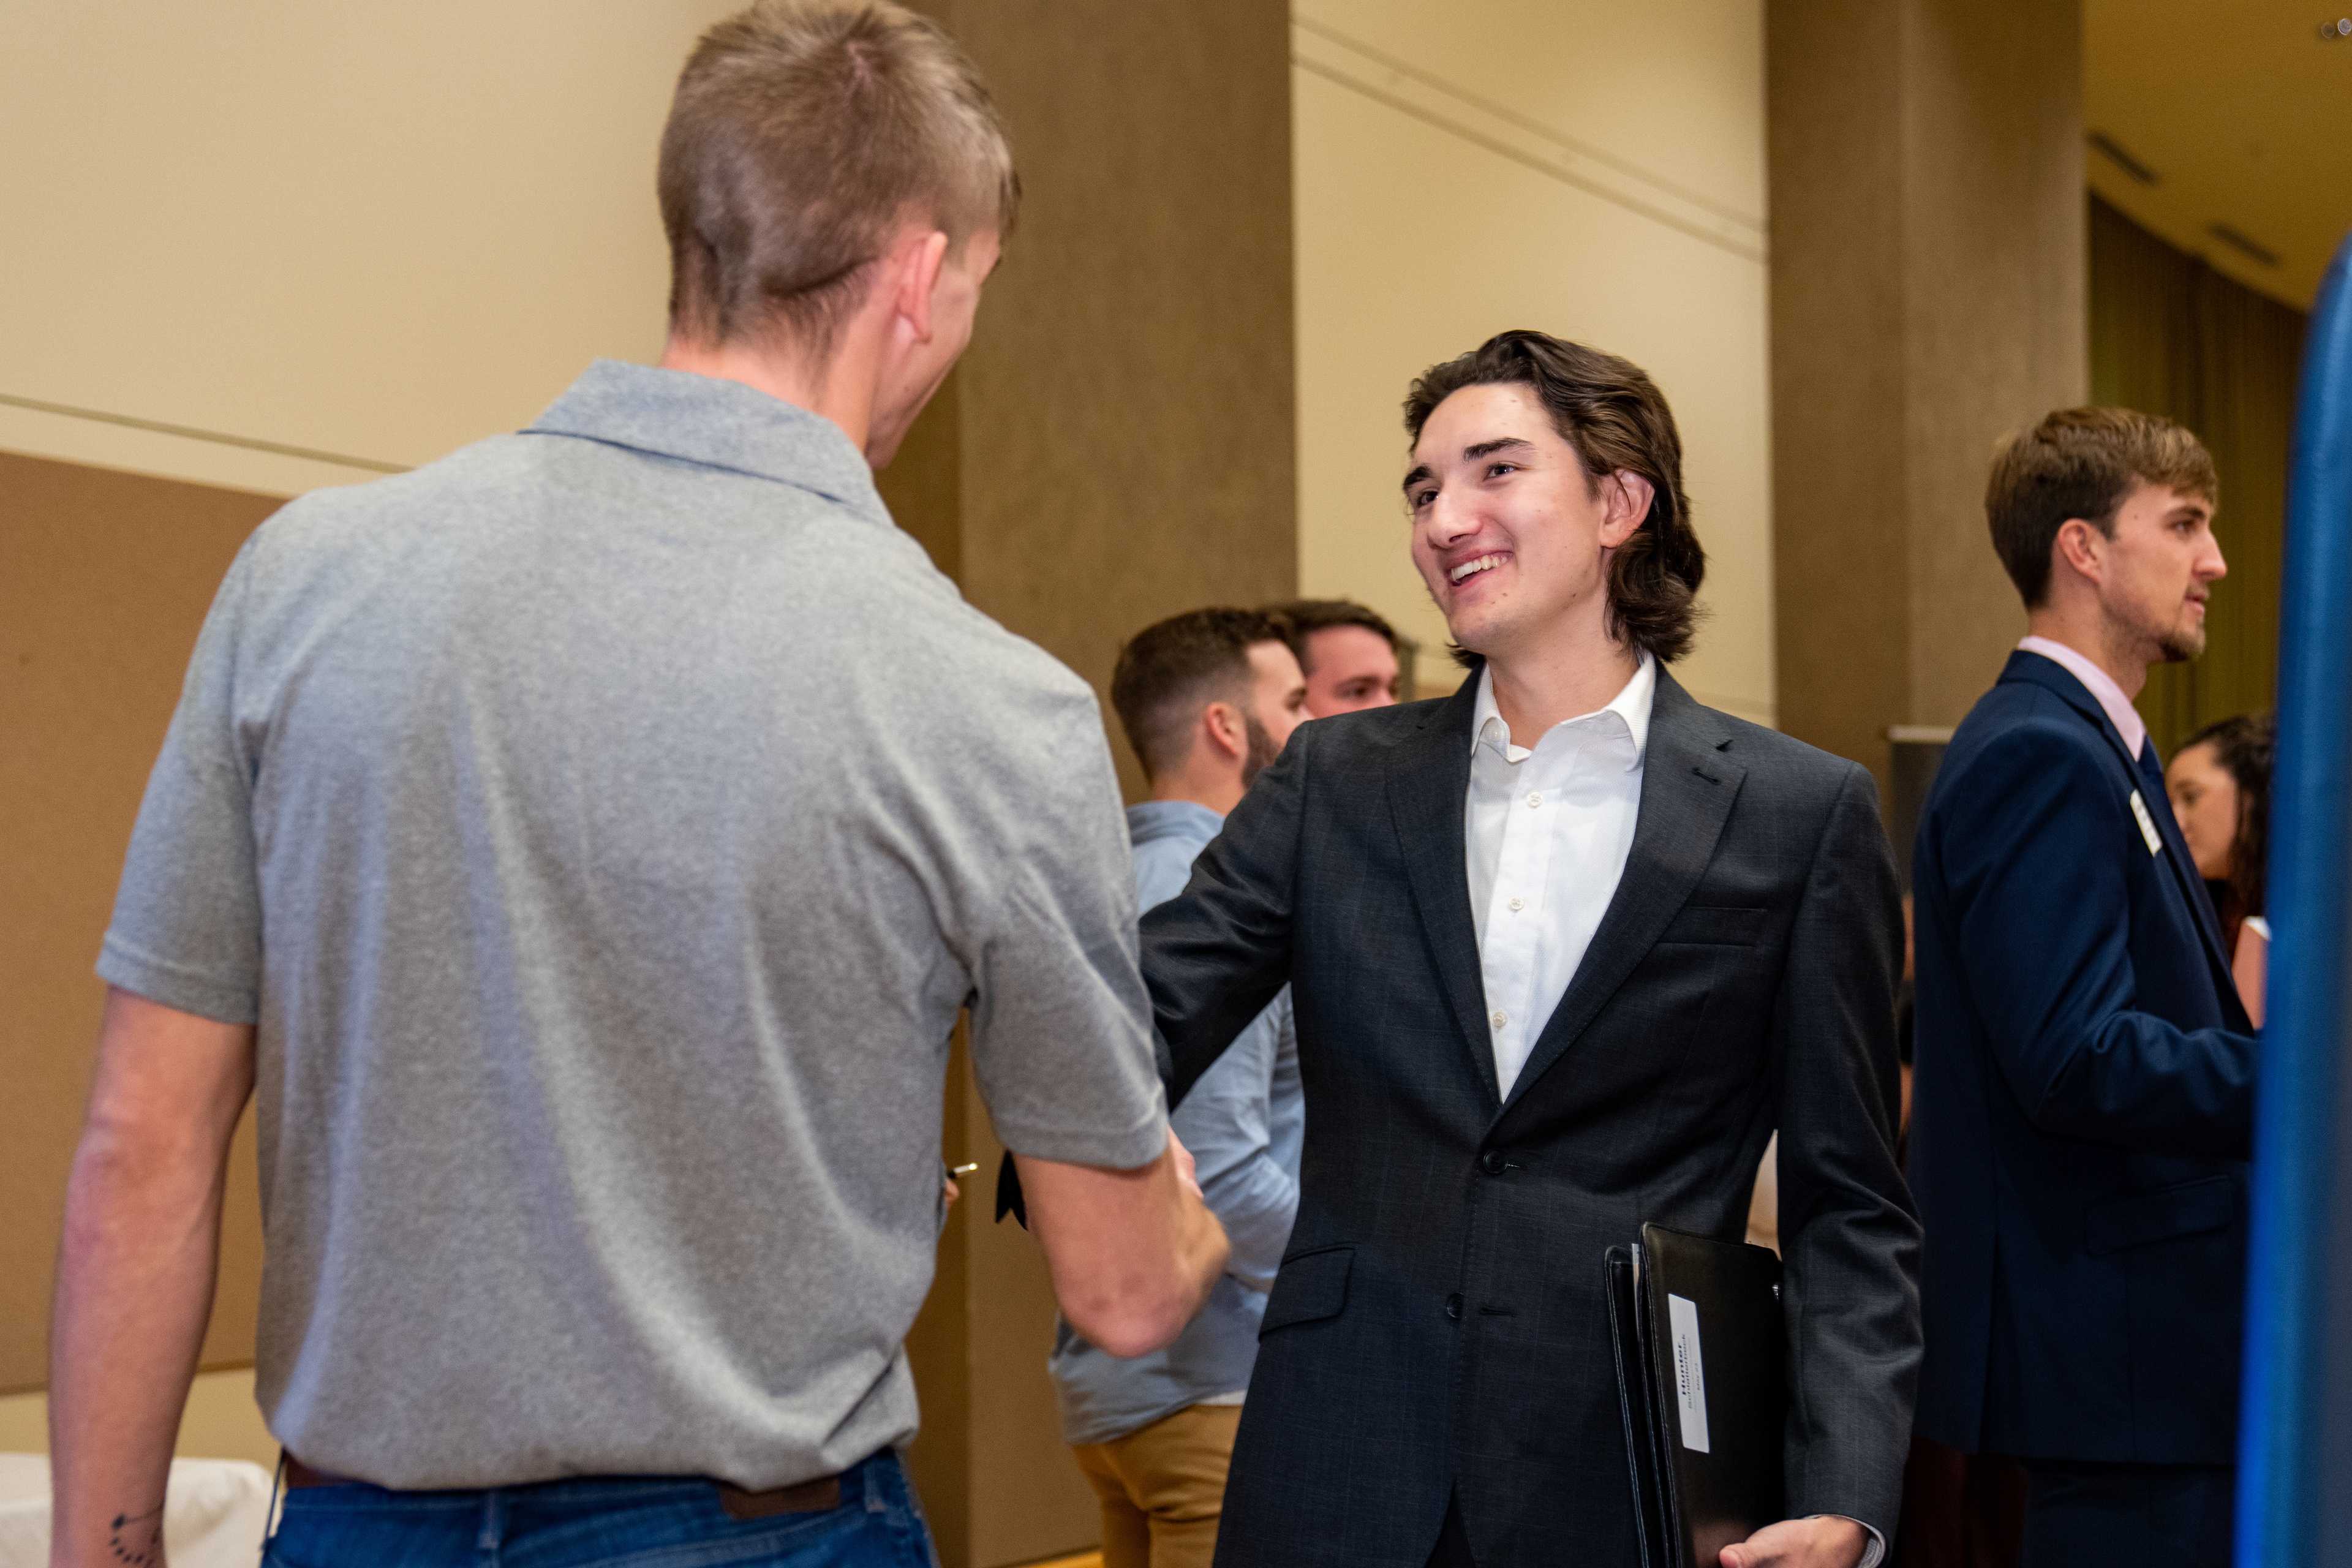 BGSU student shaking hands with employer at Career Expo